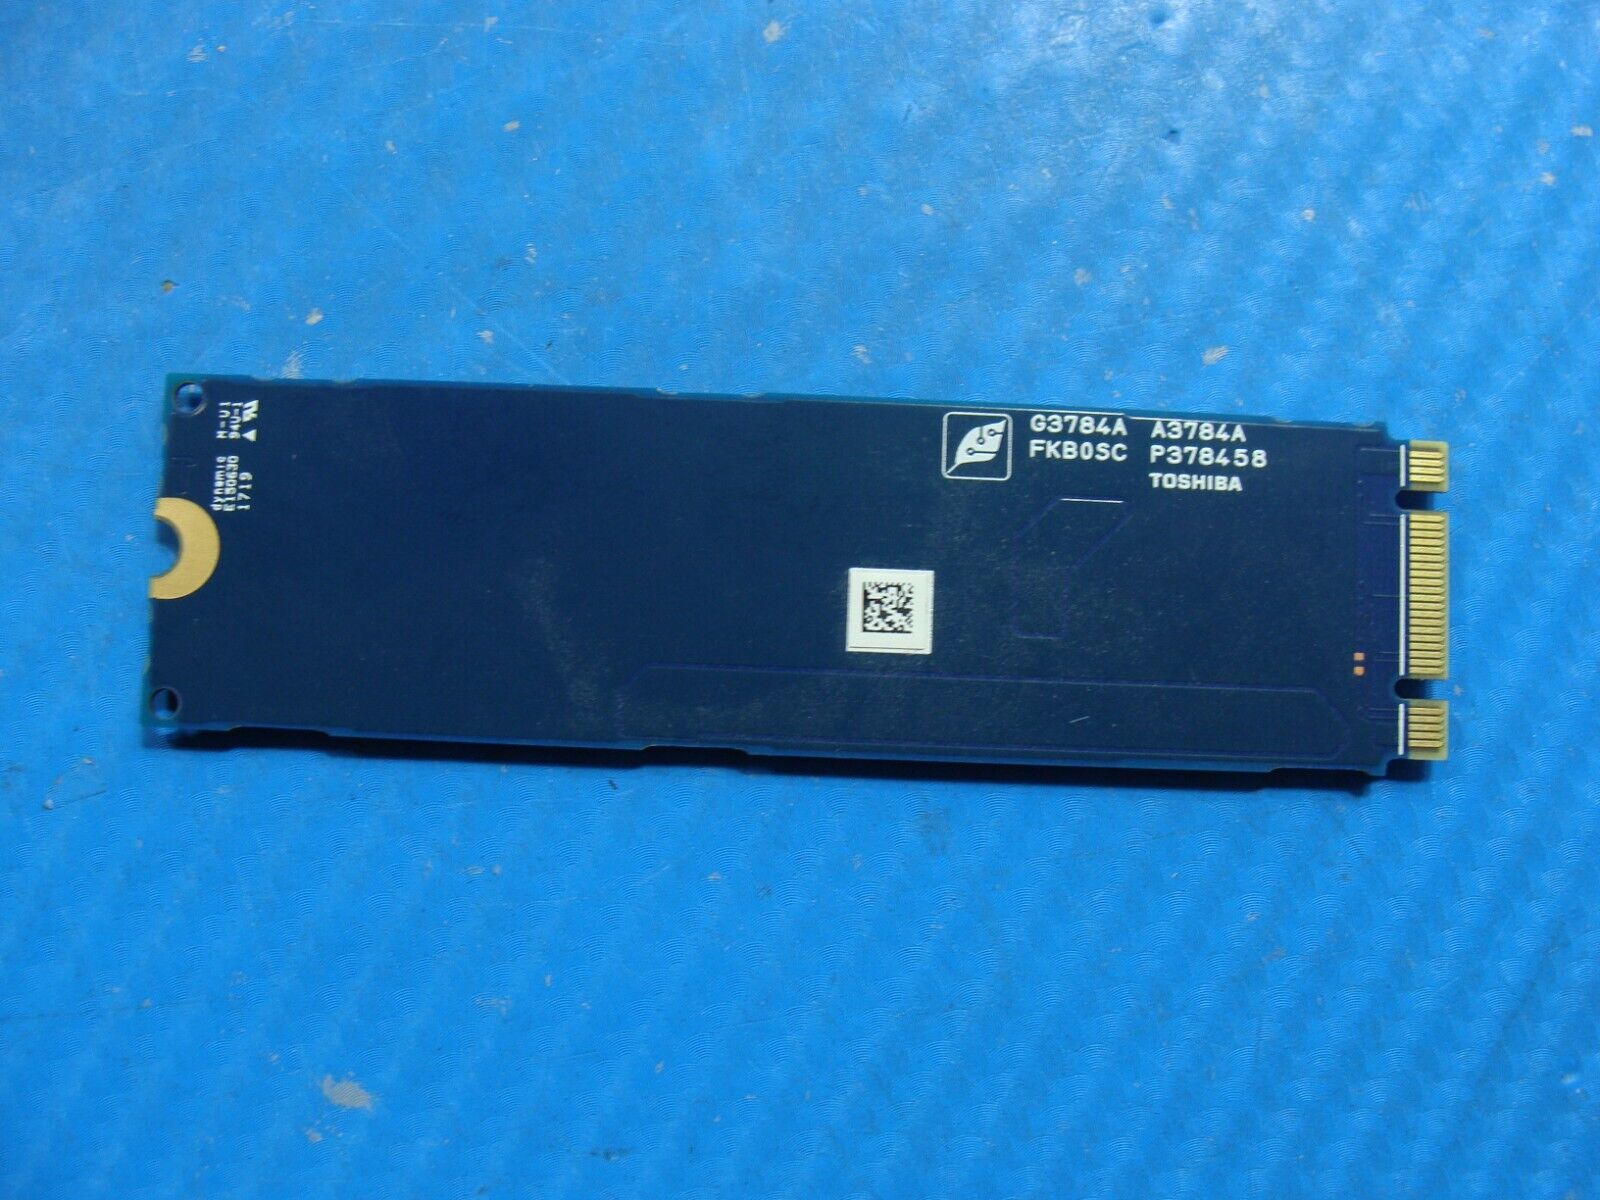 Dell 15 5577 Toshiba 128GB Sata M.2 SSD Solid State Drive THNSNK128GVN8 K43D1